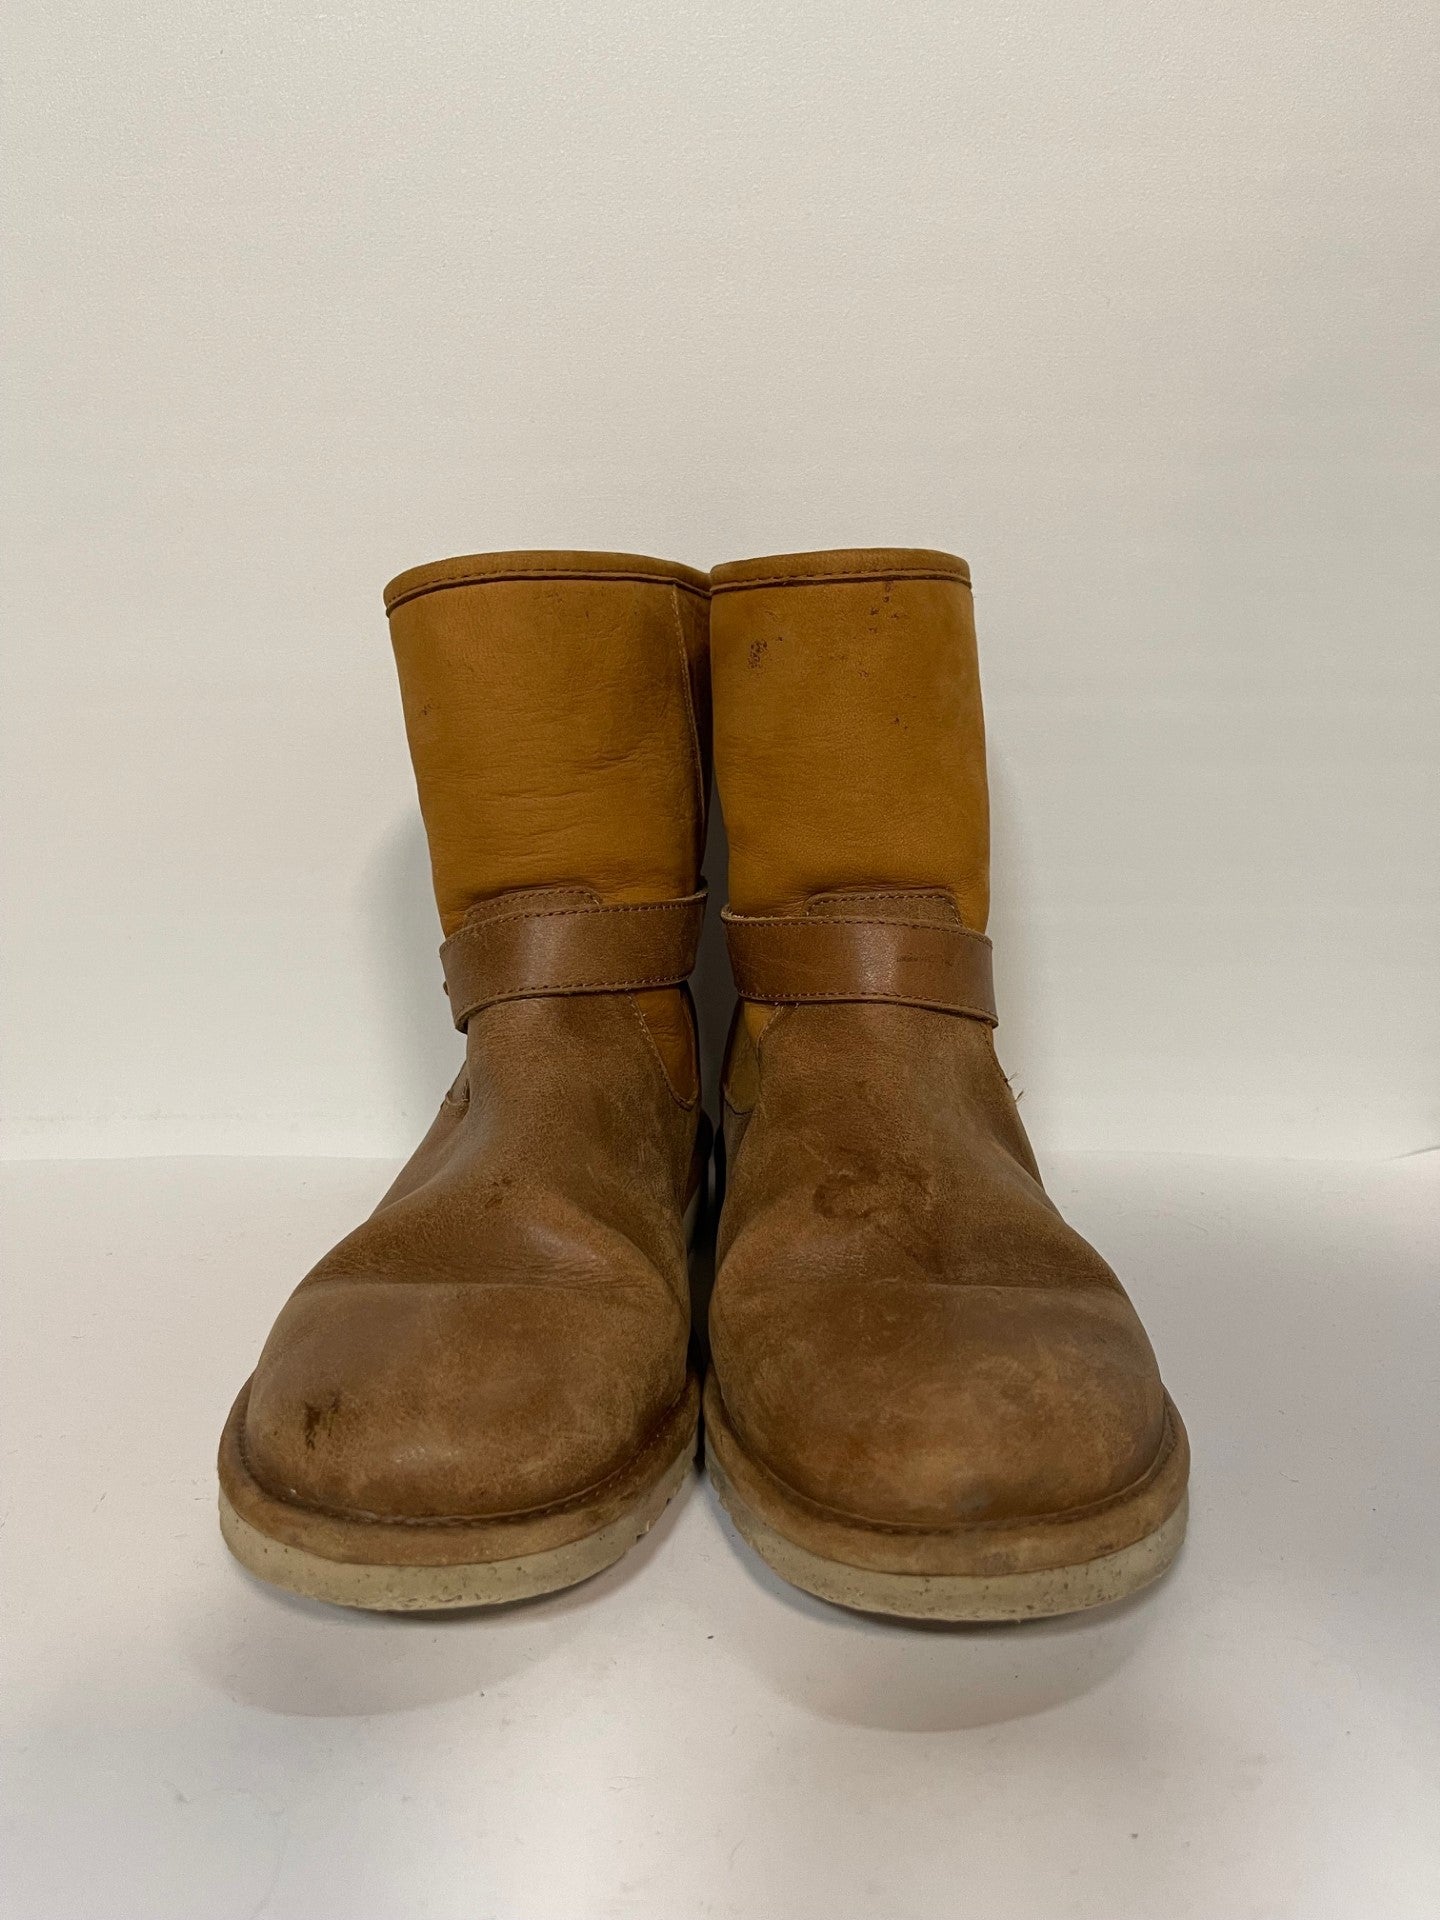 UGG Brown Anali Boots Size 7.5